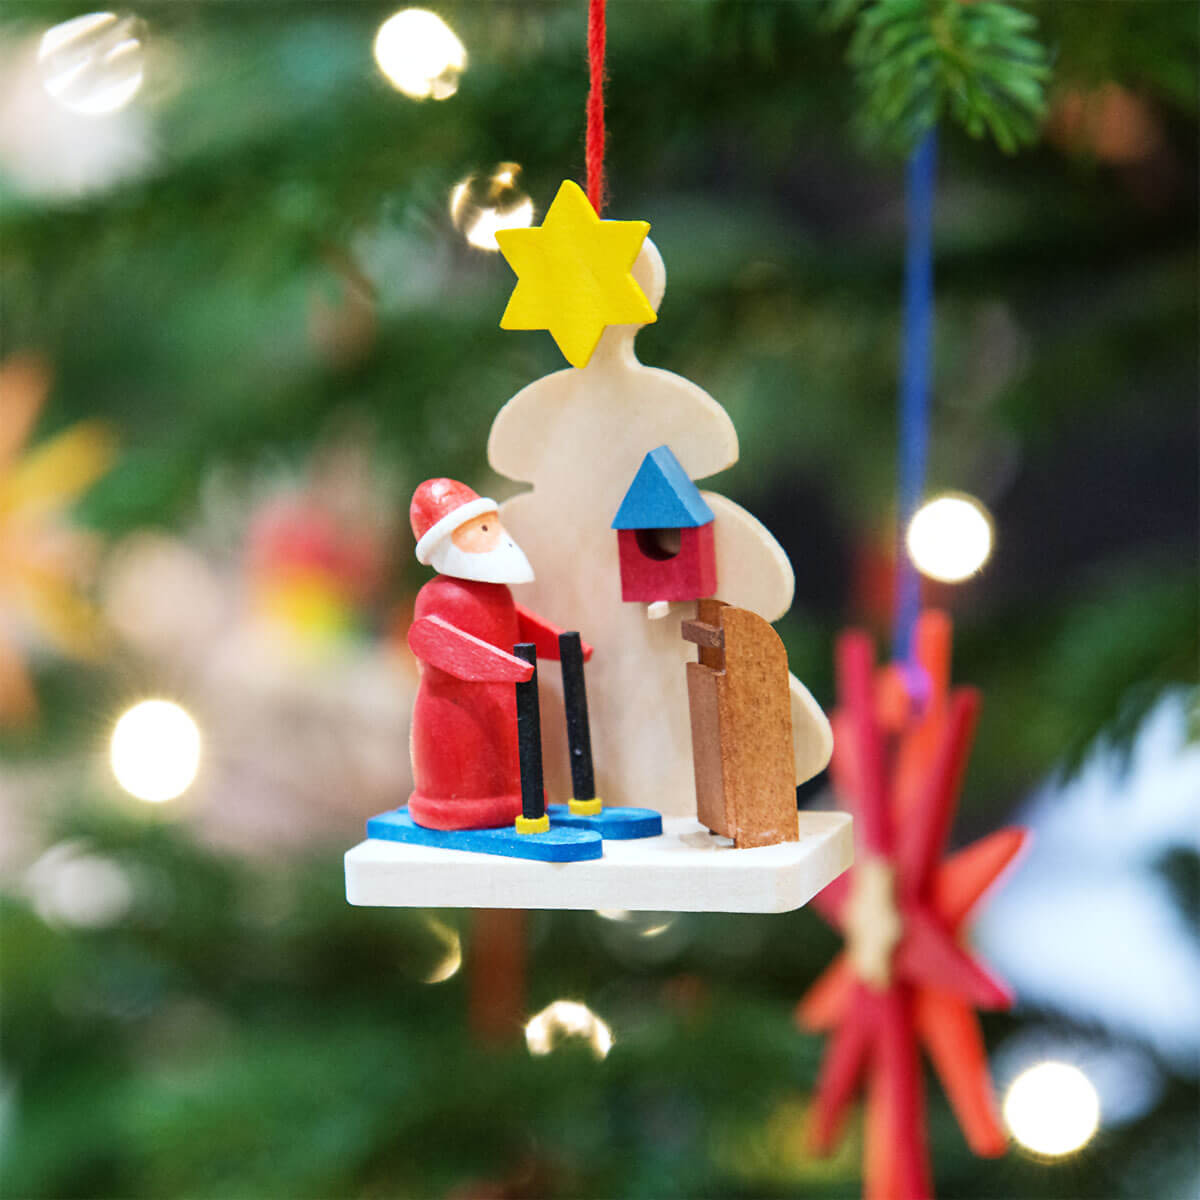 Tree 'Santa Claus' Ornament with rocking horse